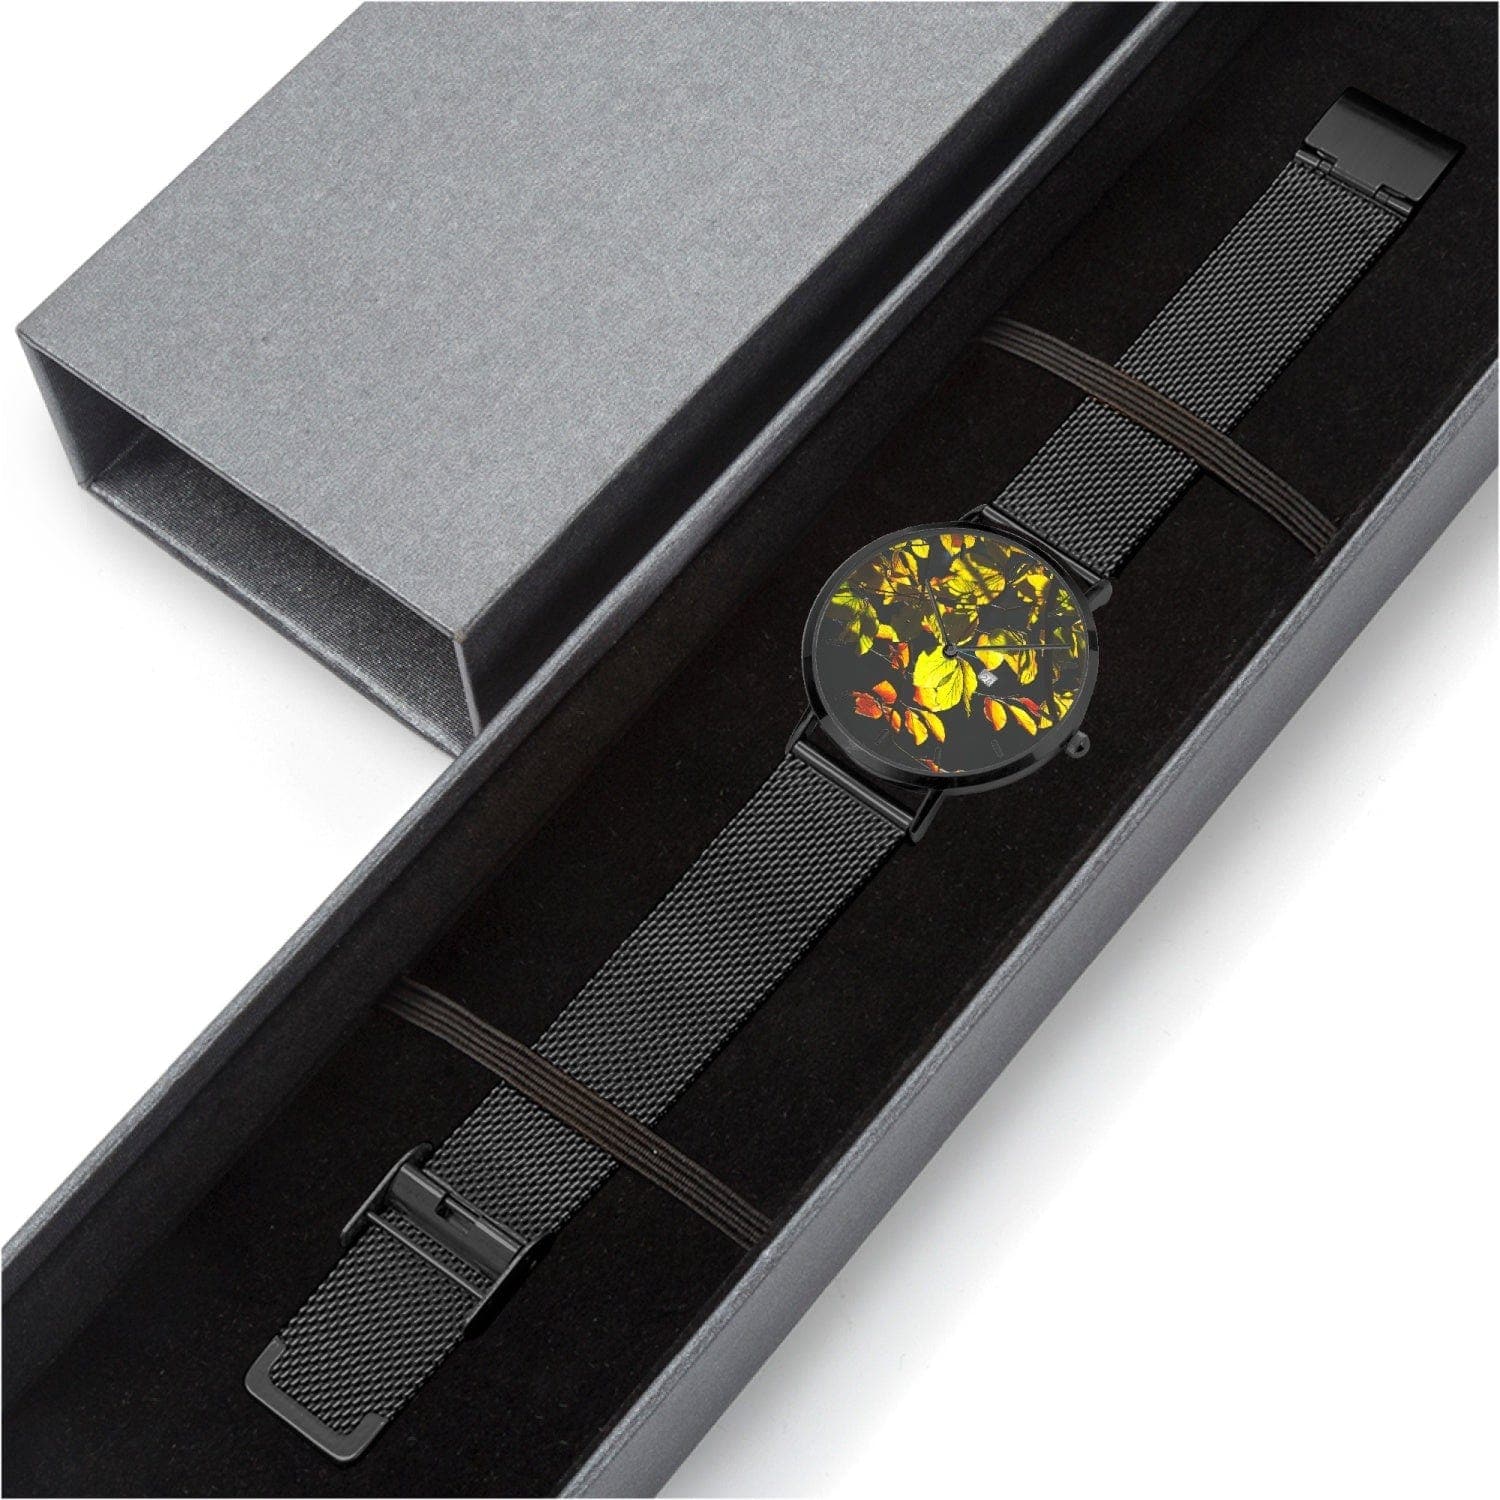 Yellow beech leafes. Stainless Steel Perpetual Calendar Quartz Watch (With Indicators), by Sensus Studio Design